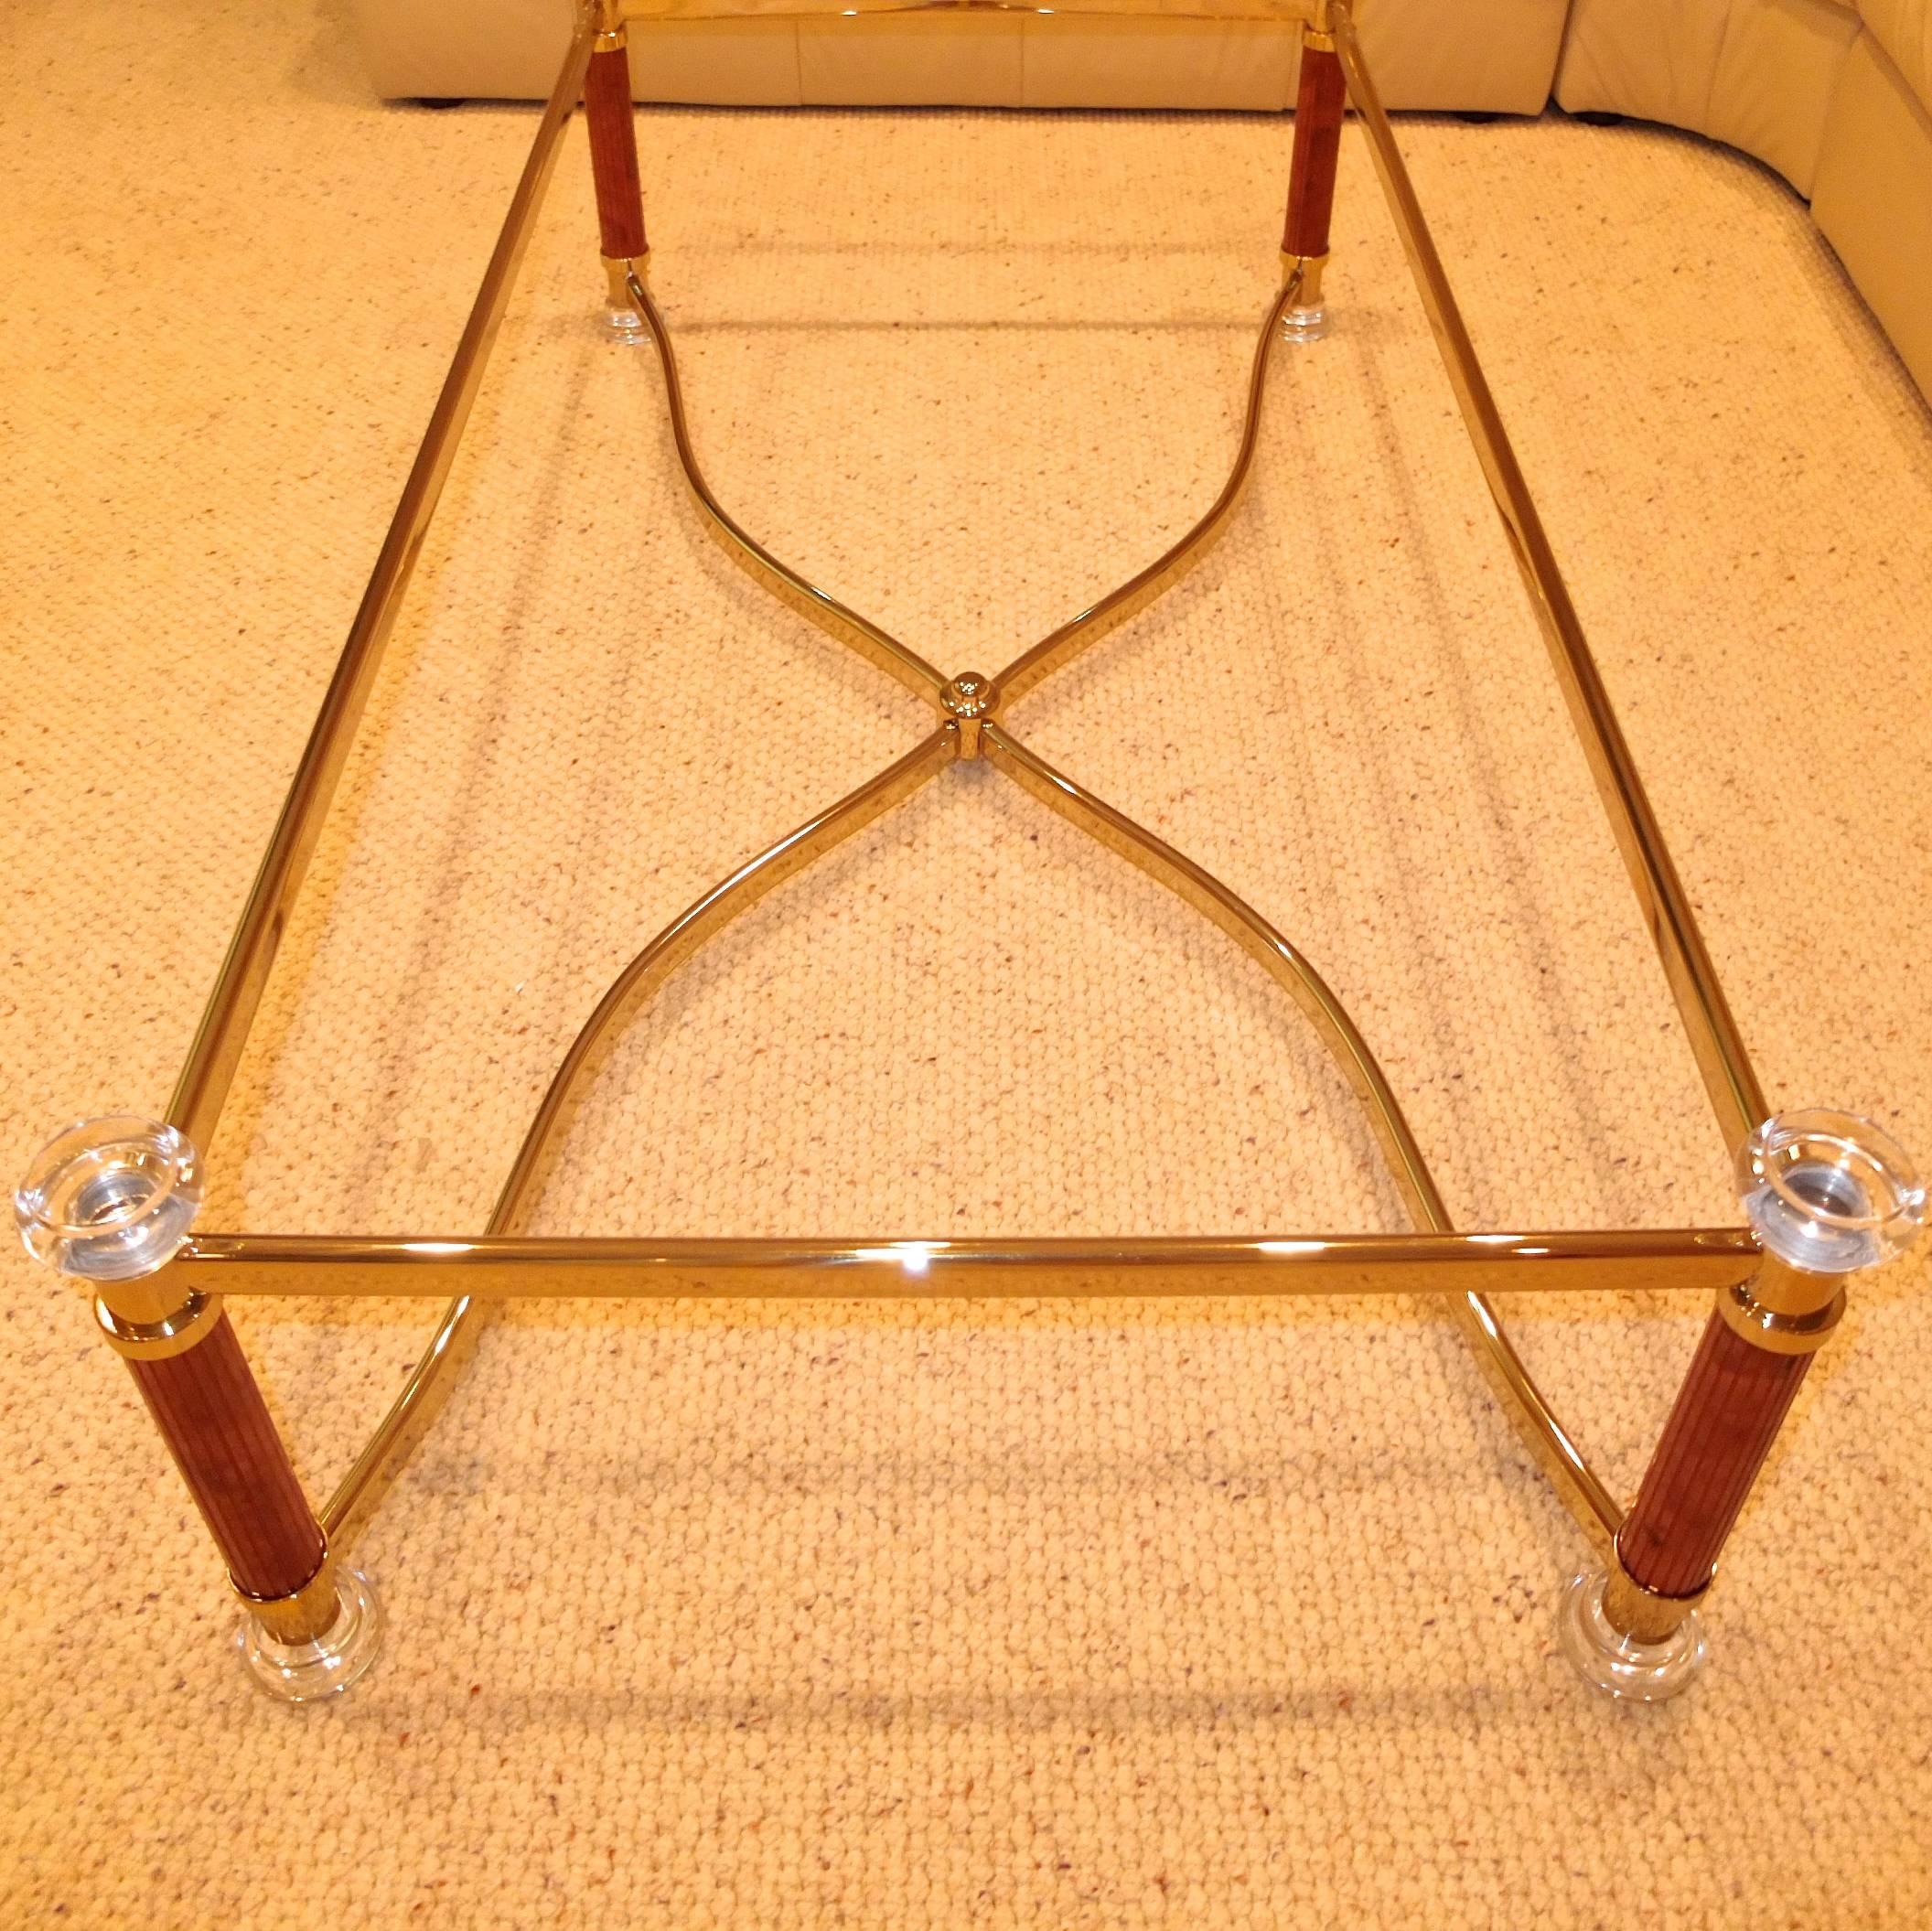 Jasper Stone, Lucite, Brass and Glass Top Cocktail Table In Excellent Condition For Sale In Hanover, MA